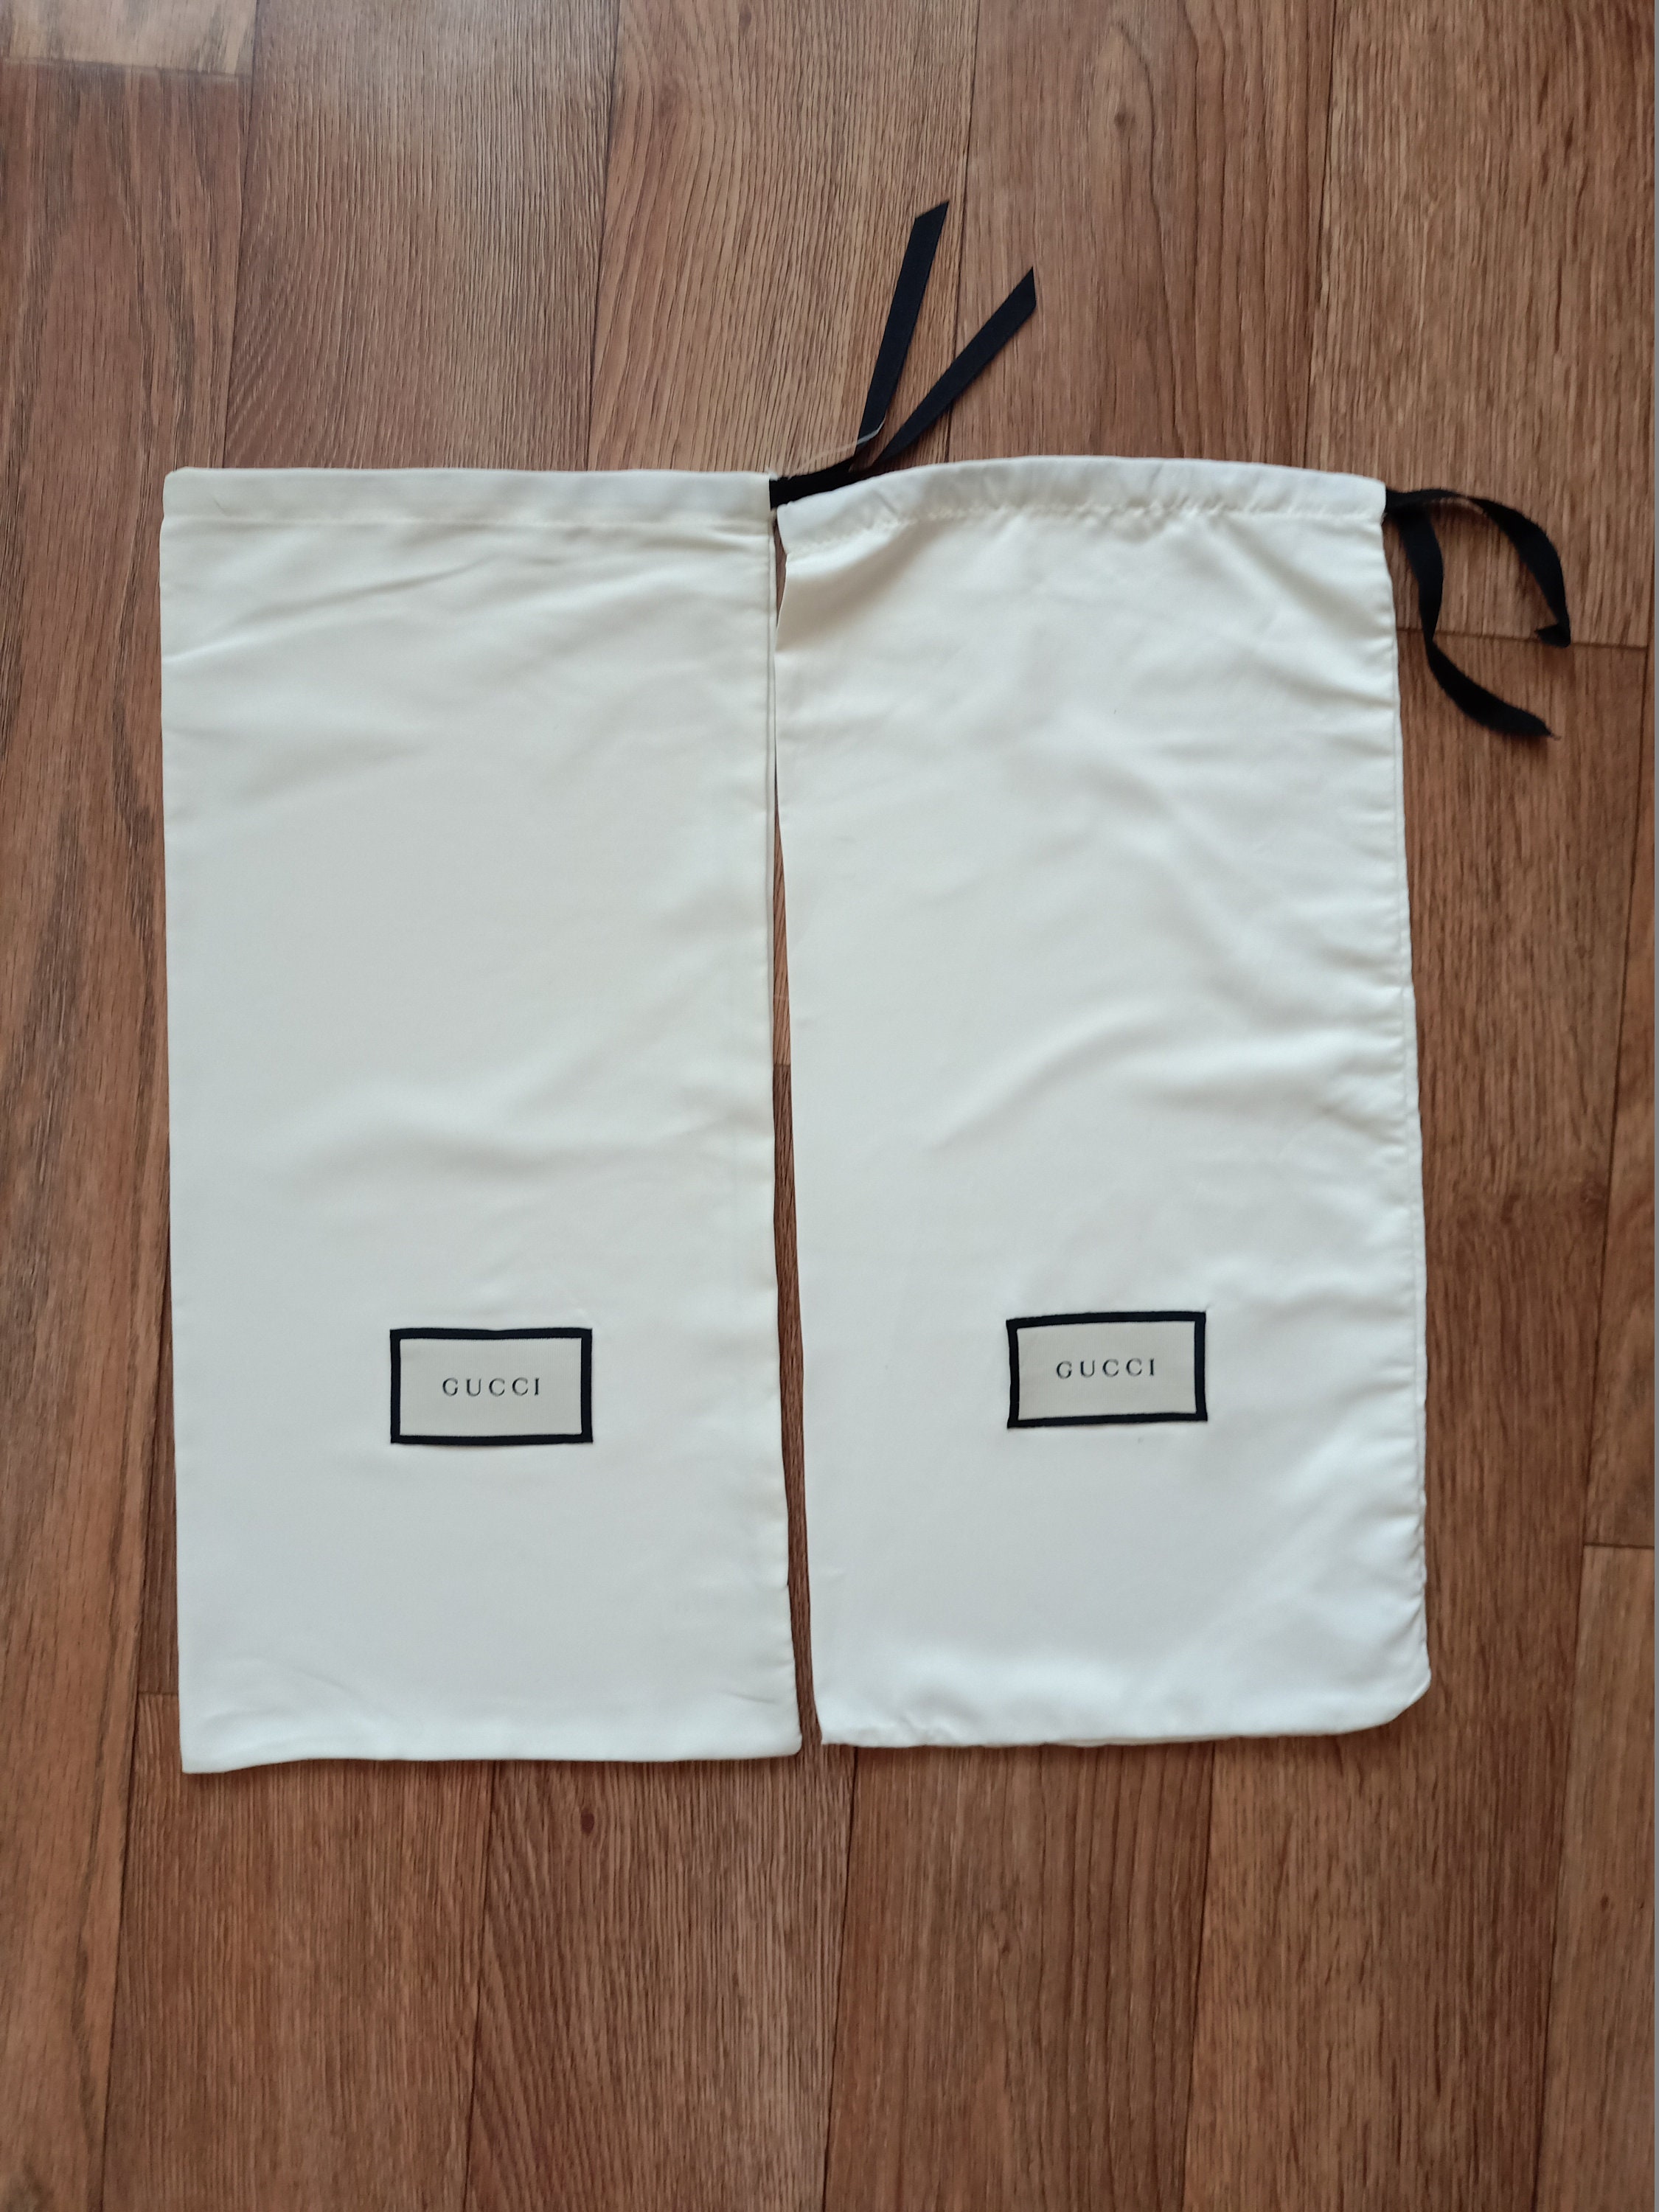 GUCCI LOT 2 White Polyester Dust Bag for Shoes 2042 Cm -  Israel